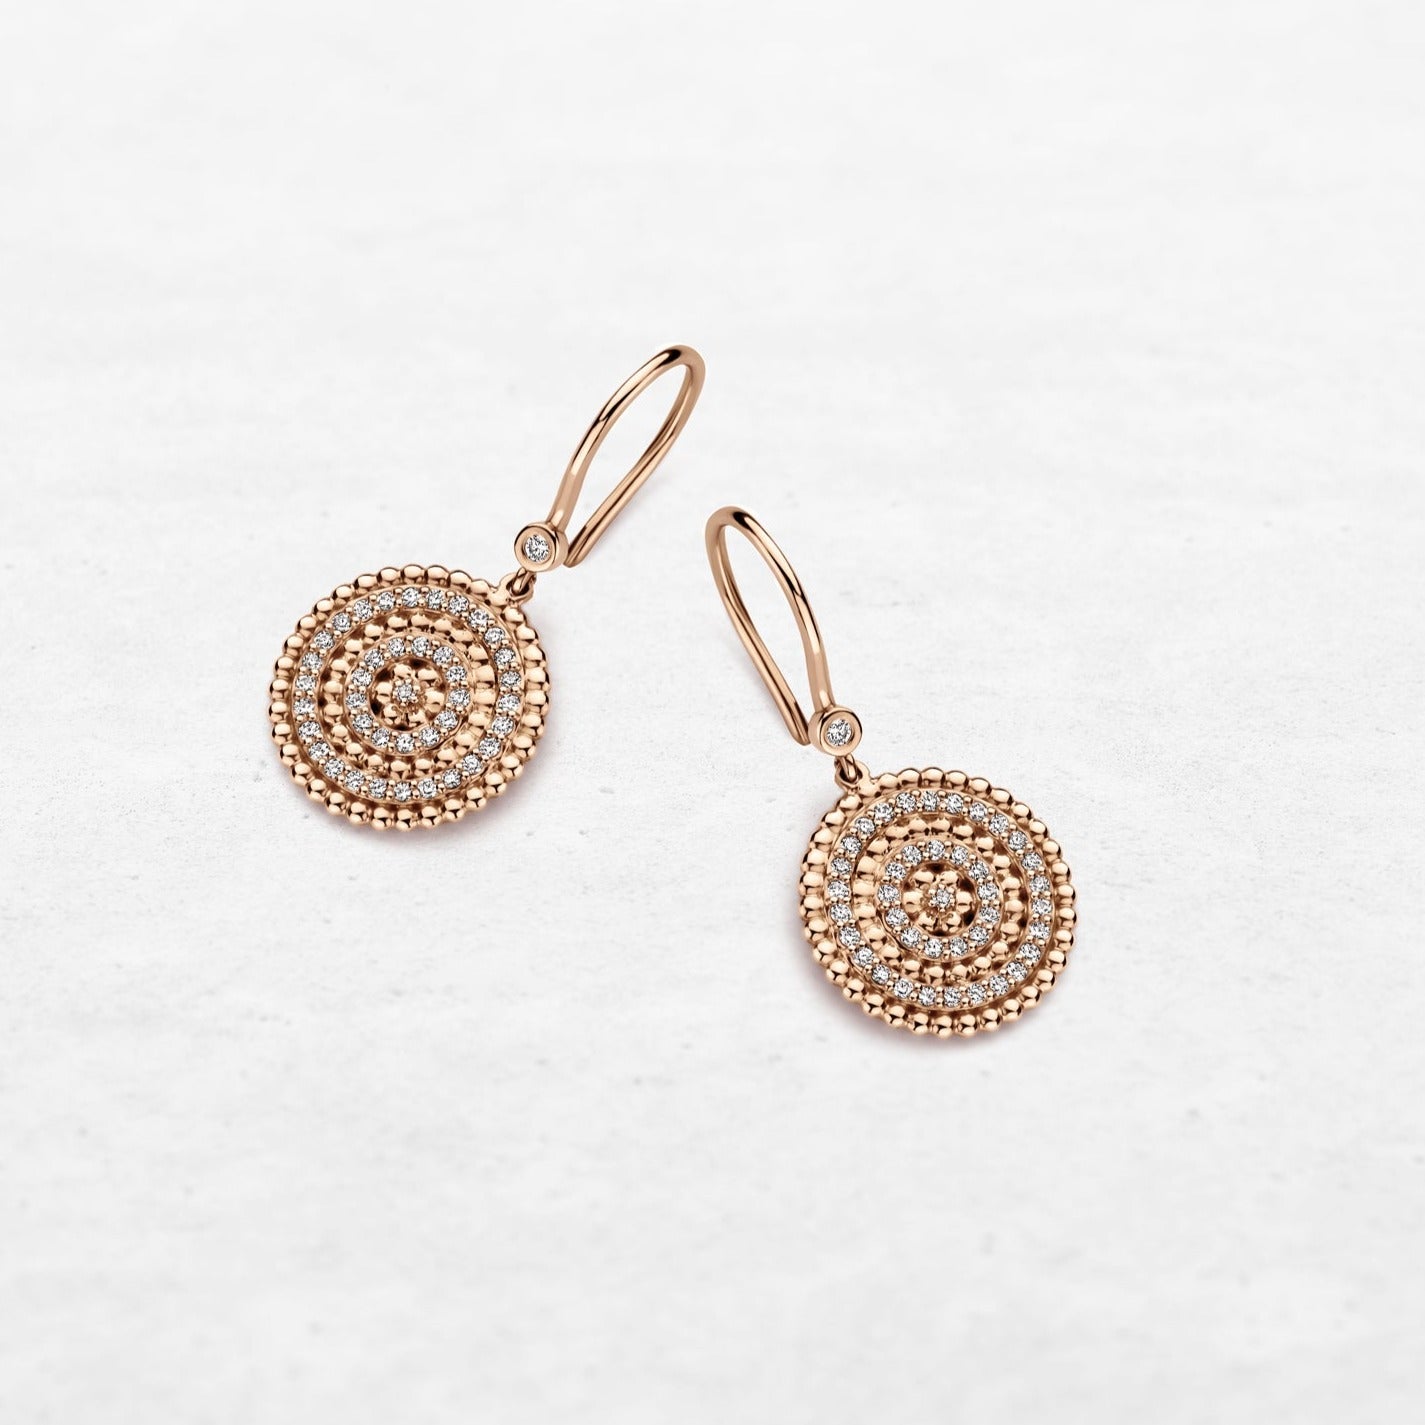 Earrings with circular plateau in gold and diamonds in rose gold made by O! Jewelry